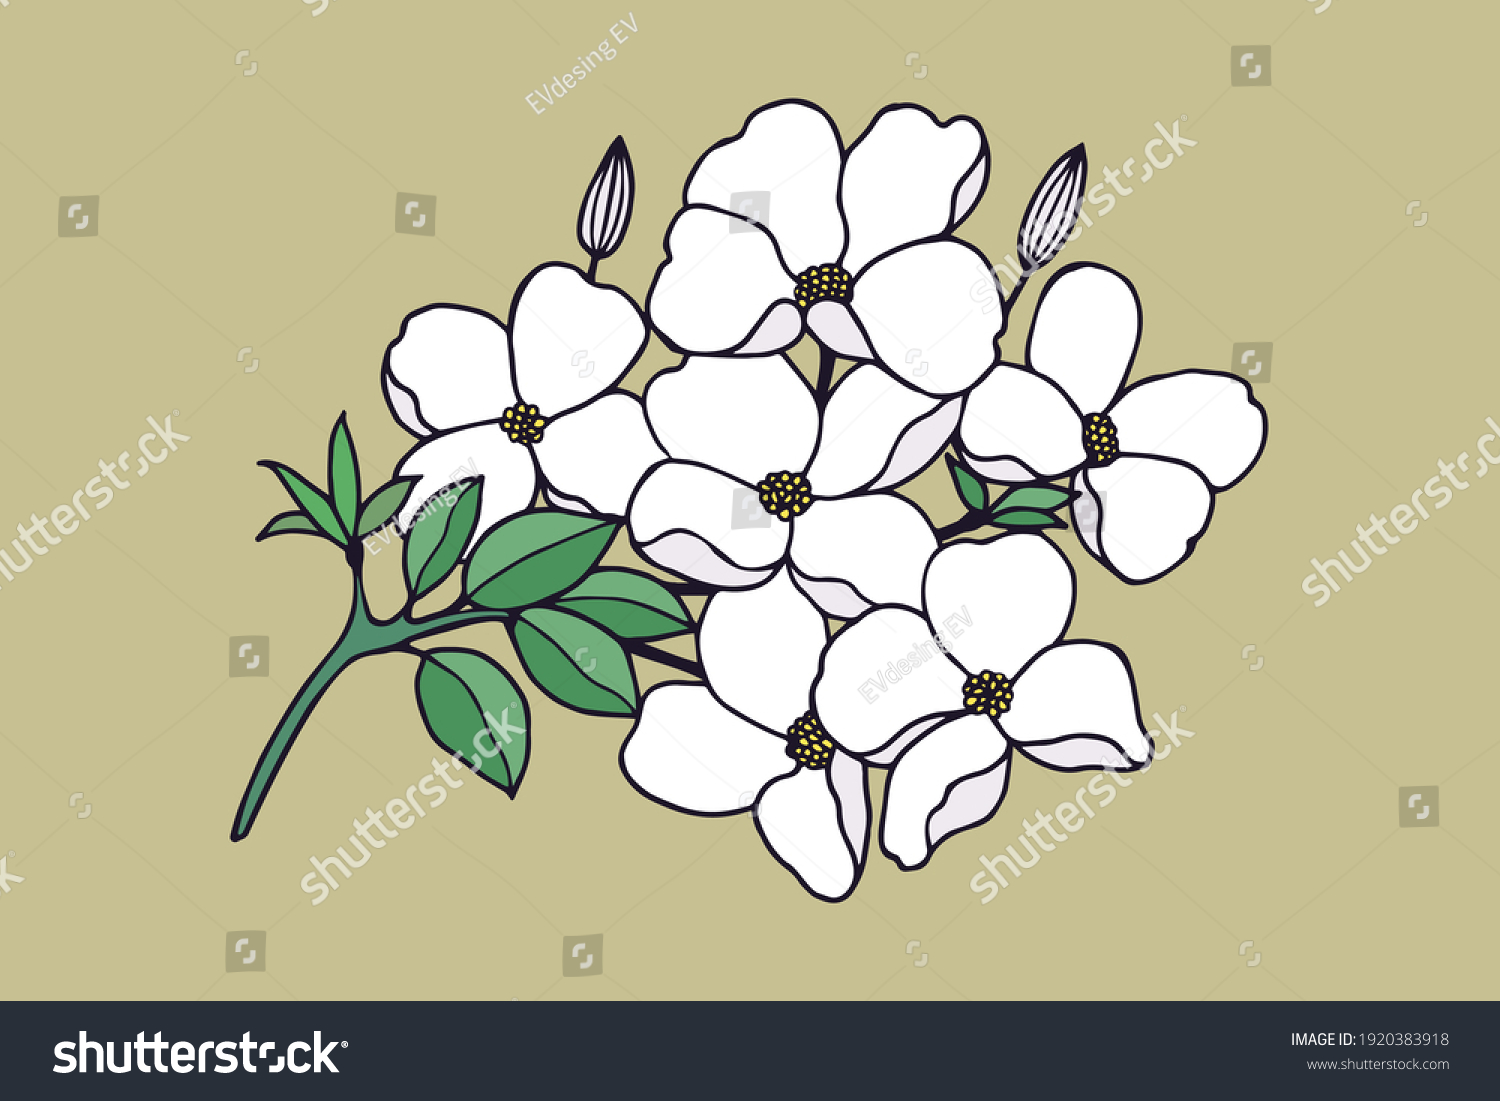 SVG of Branch with flowers. Dogwood. Vector stock illustration eps10.  svg